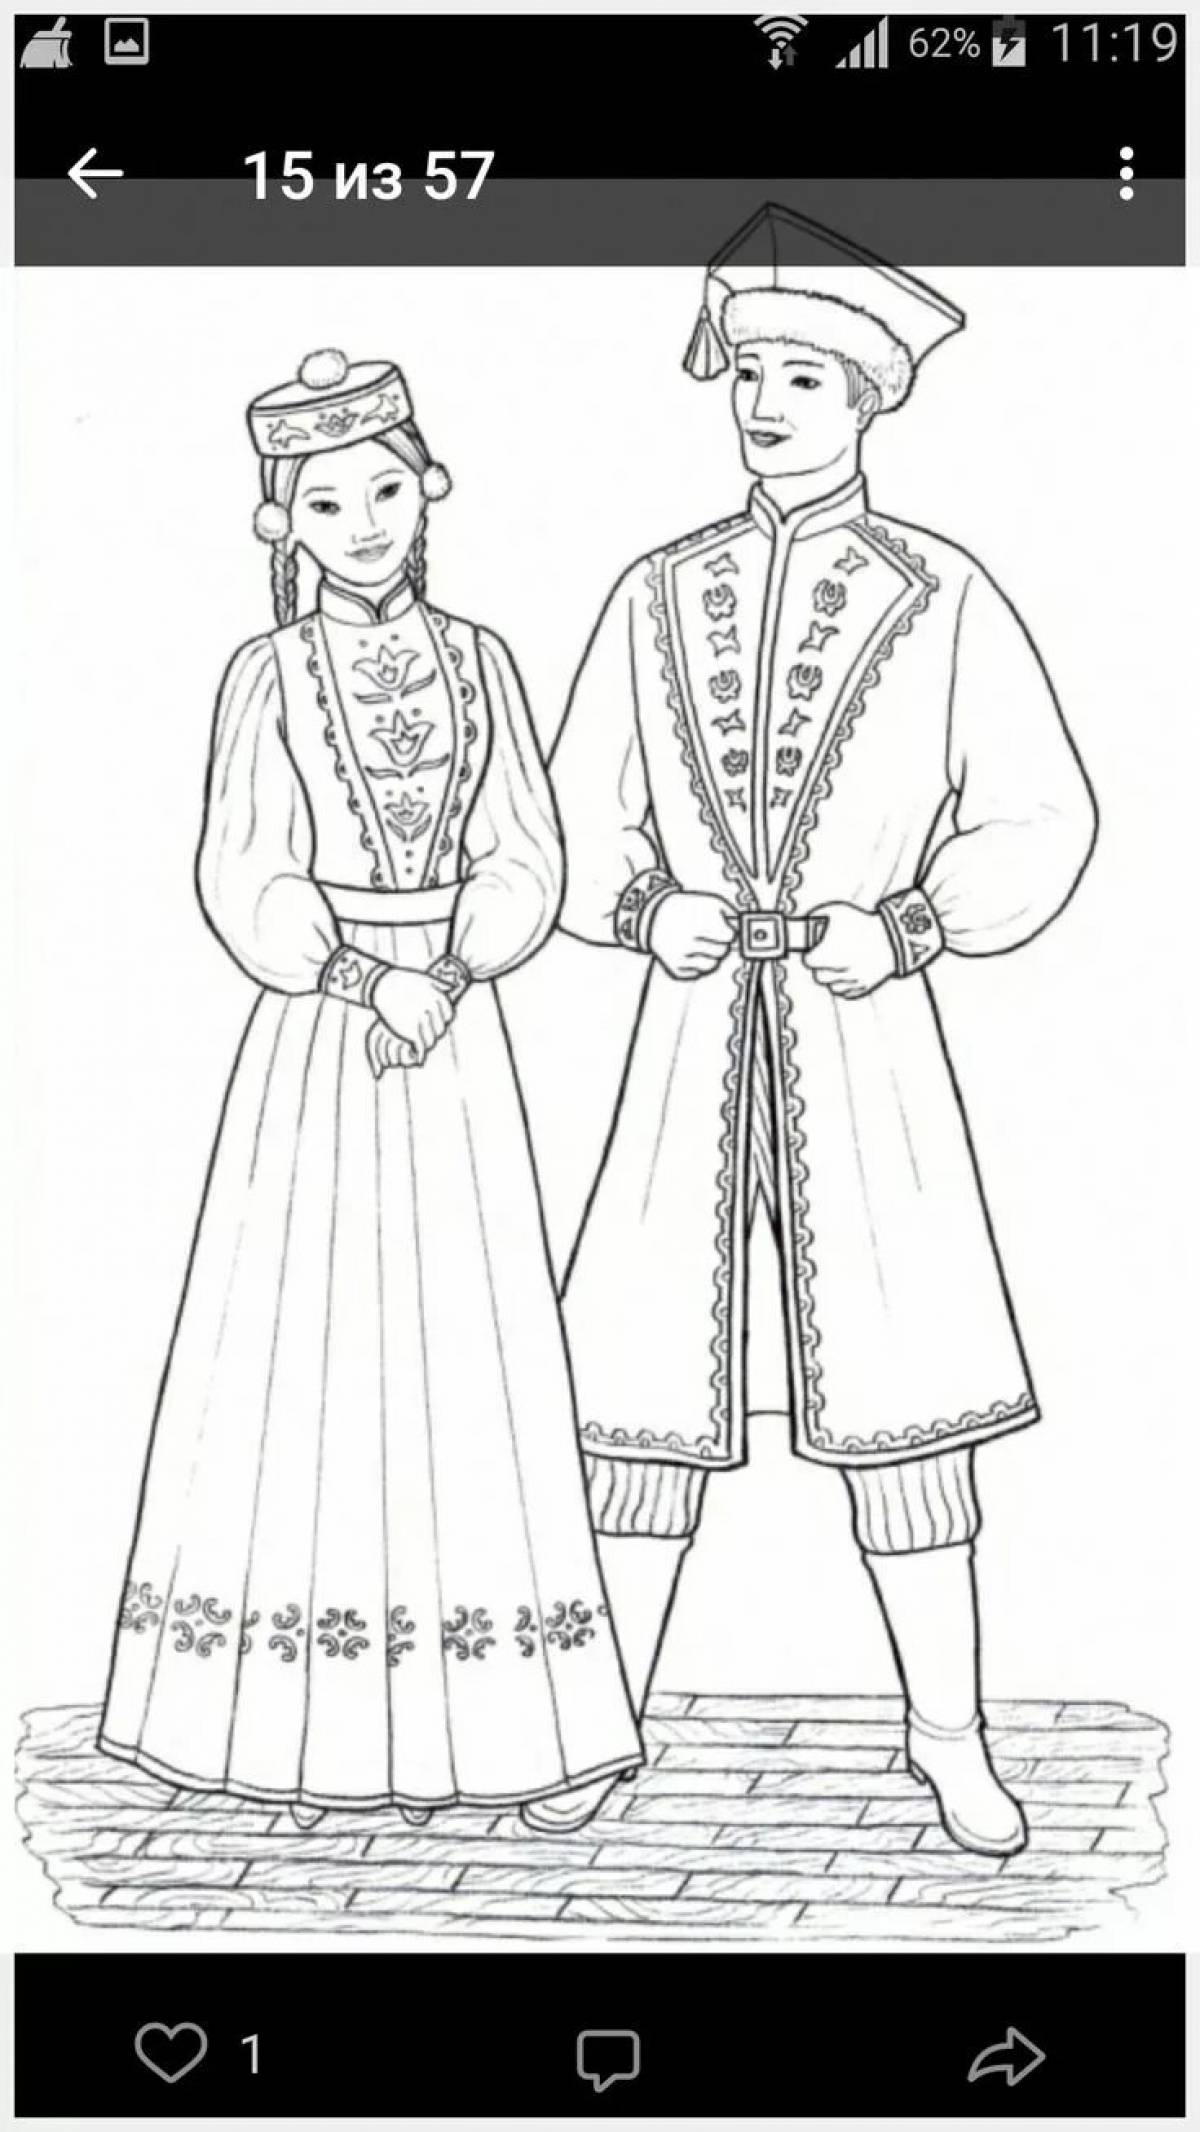 Hip-folk costume coloring page for kids